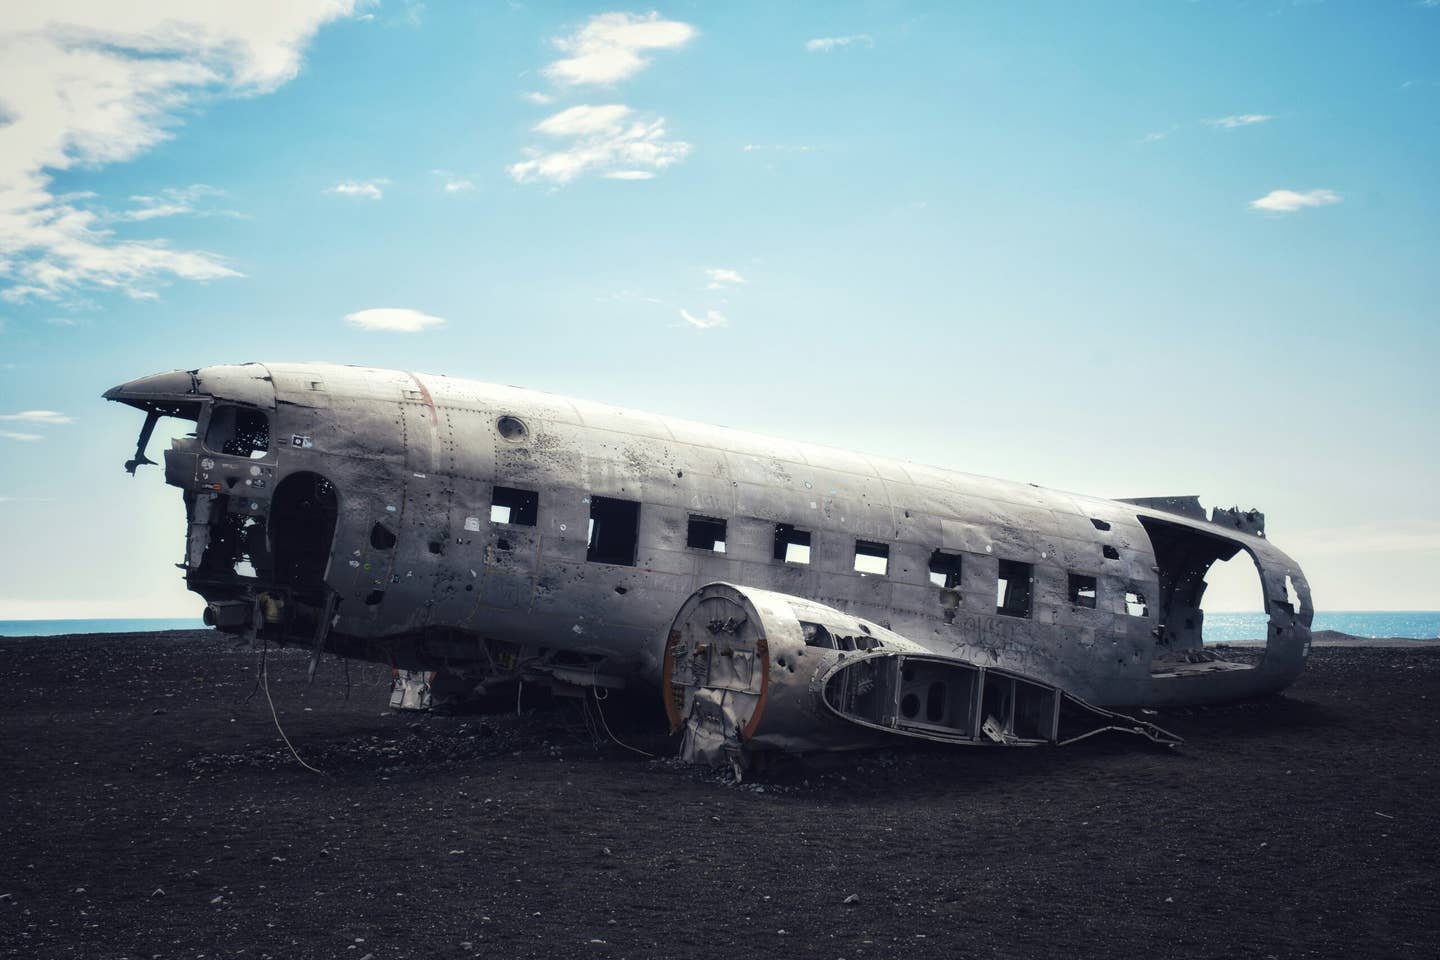 Rusted fuselage of a crashed US Navy DC-3